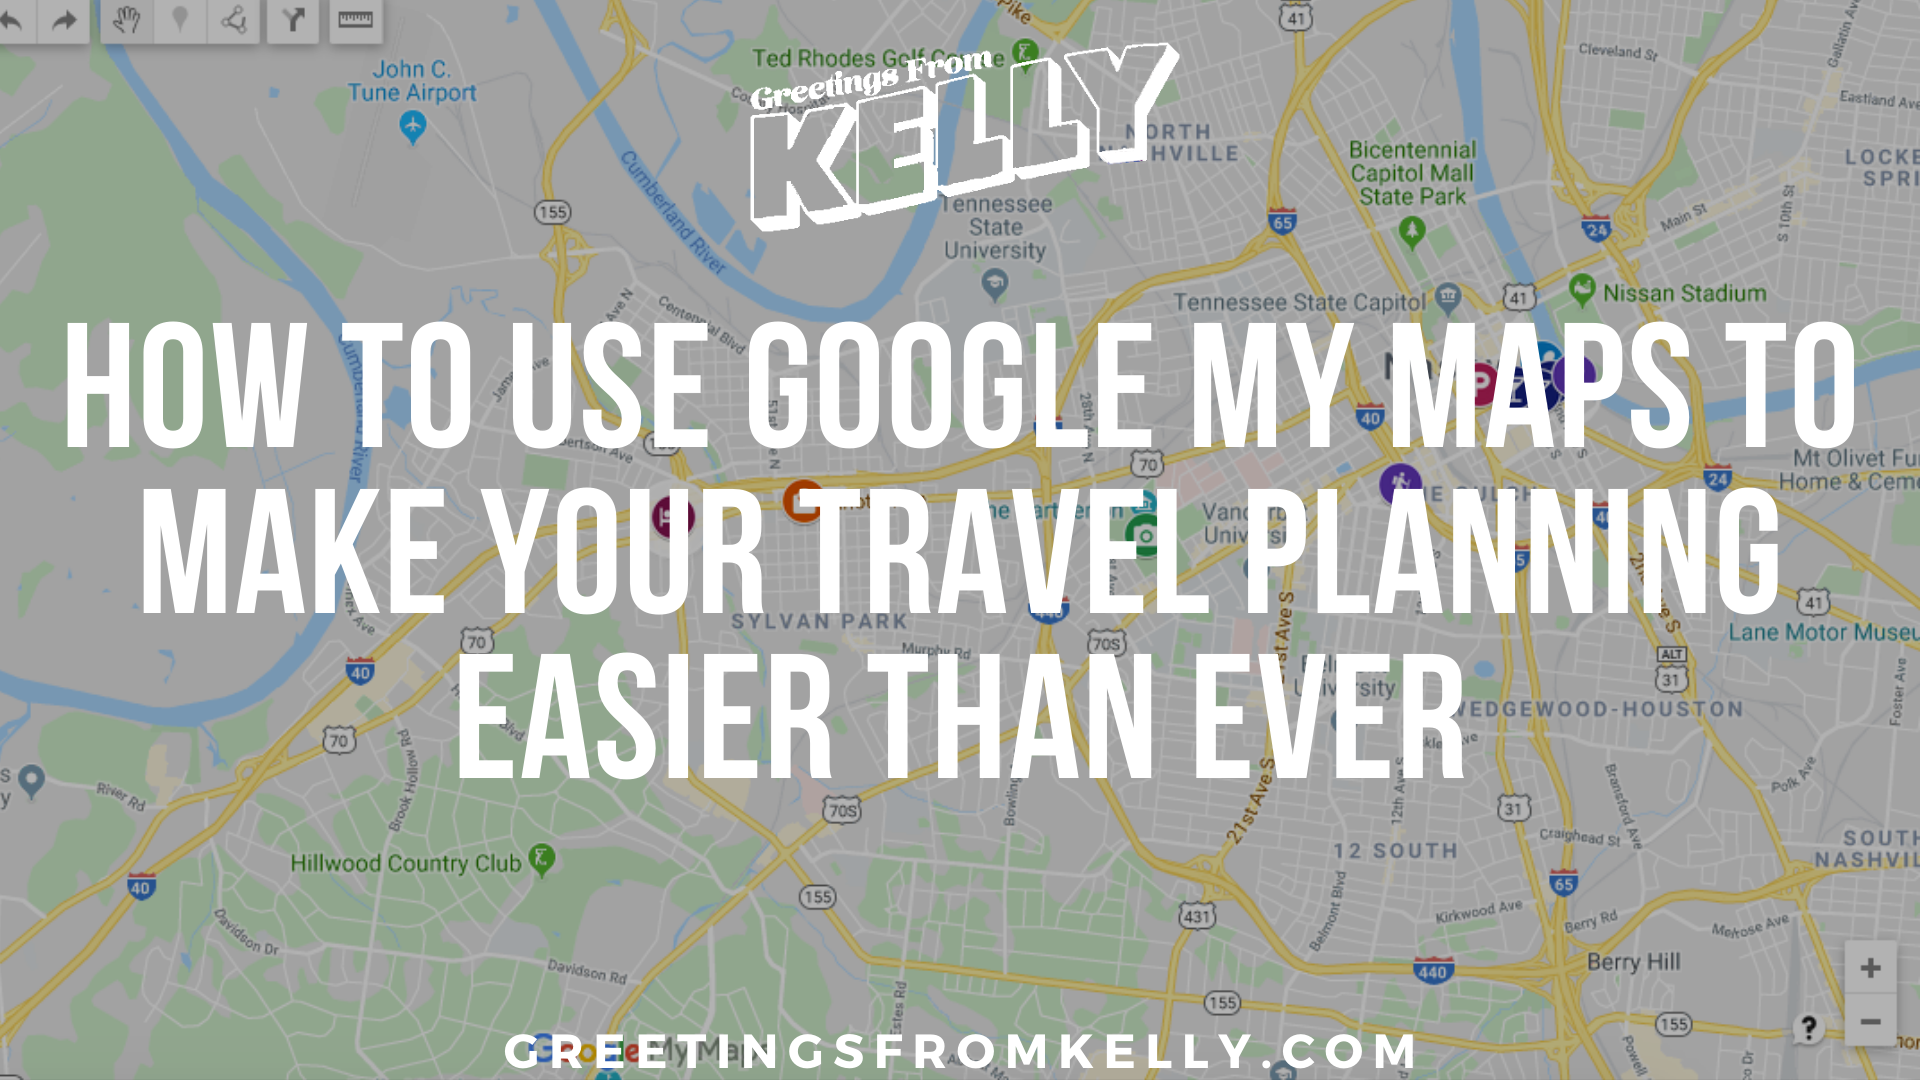 How to use Google My Maps to Make Your Travel Planning Easier than Ever